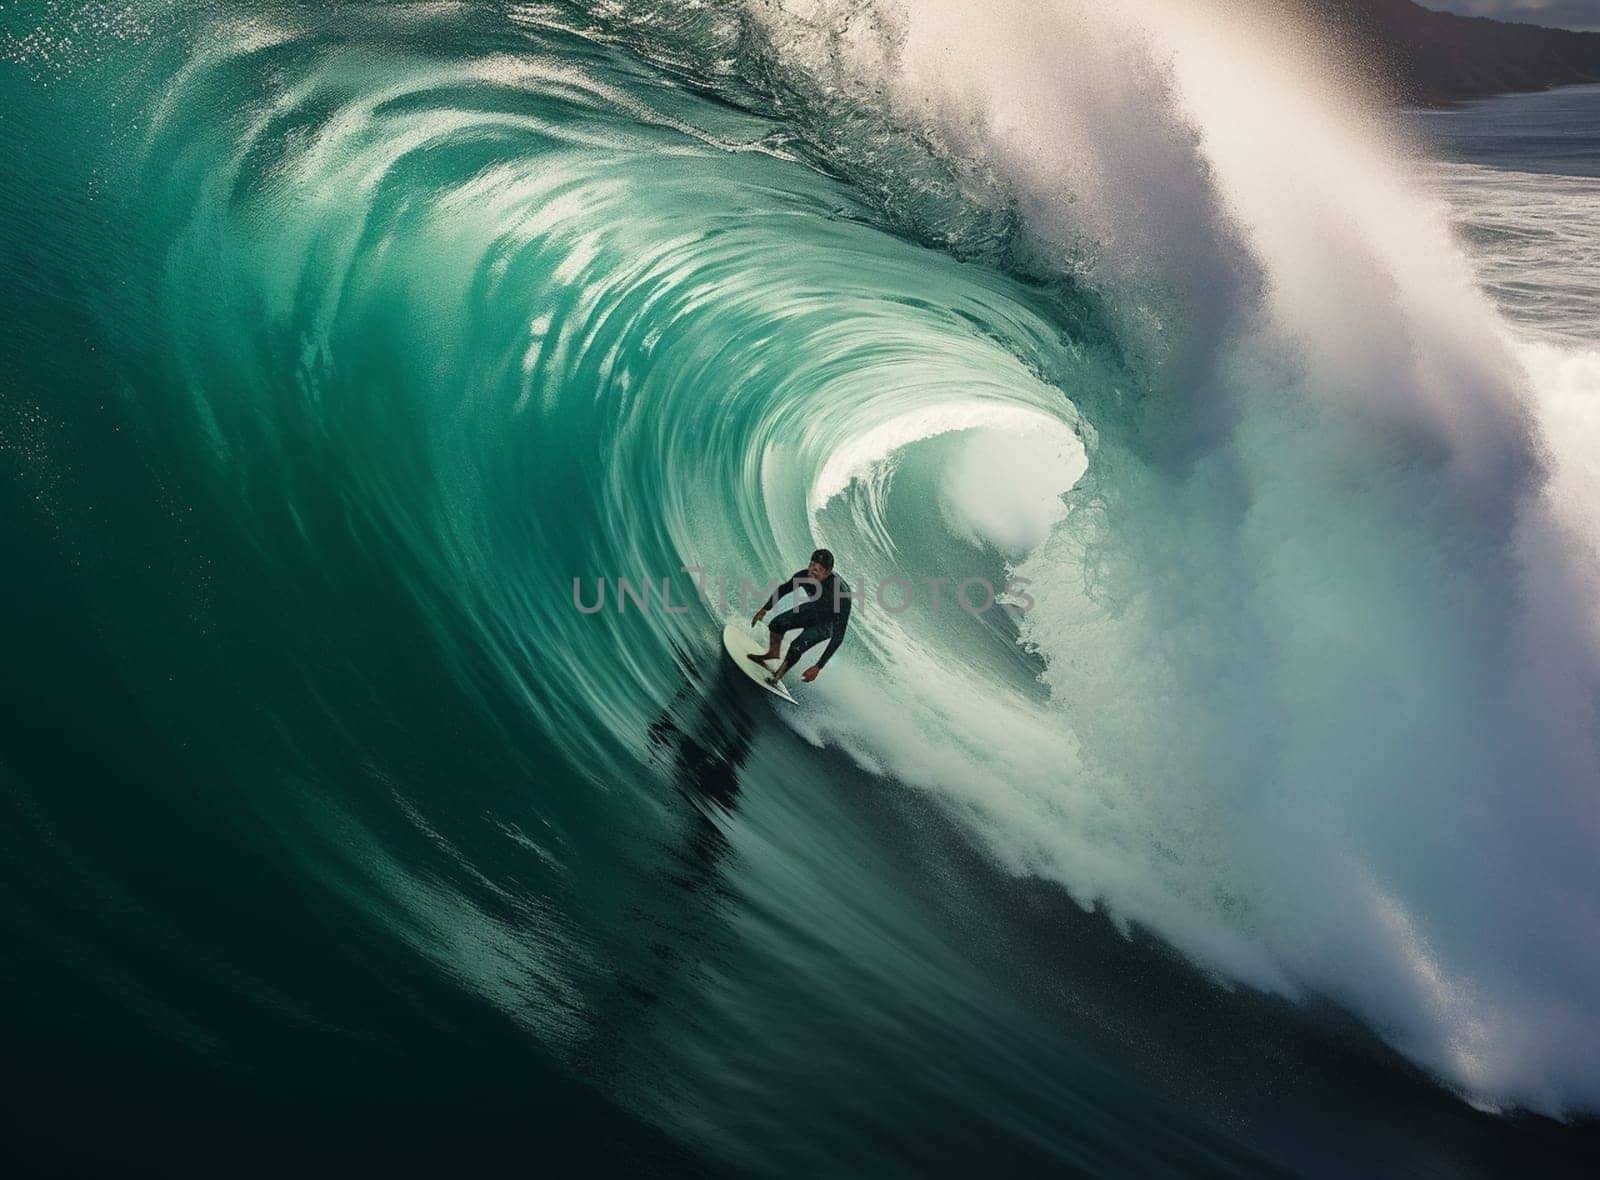 Surfer on the crest of a wave. Layers of turquoise and blue paints. Artistic work. High quality photo